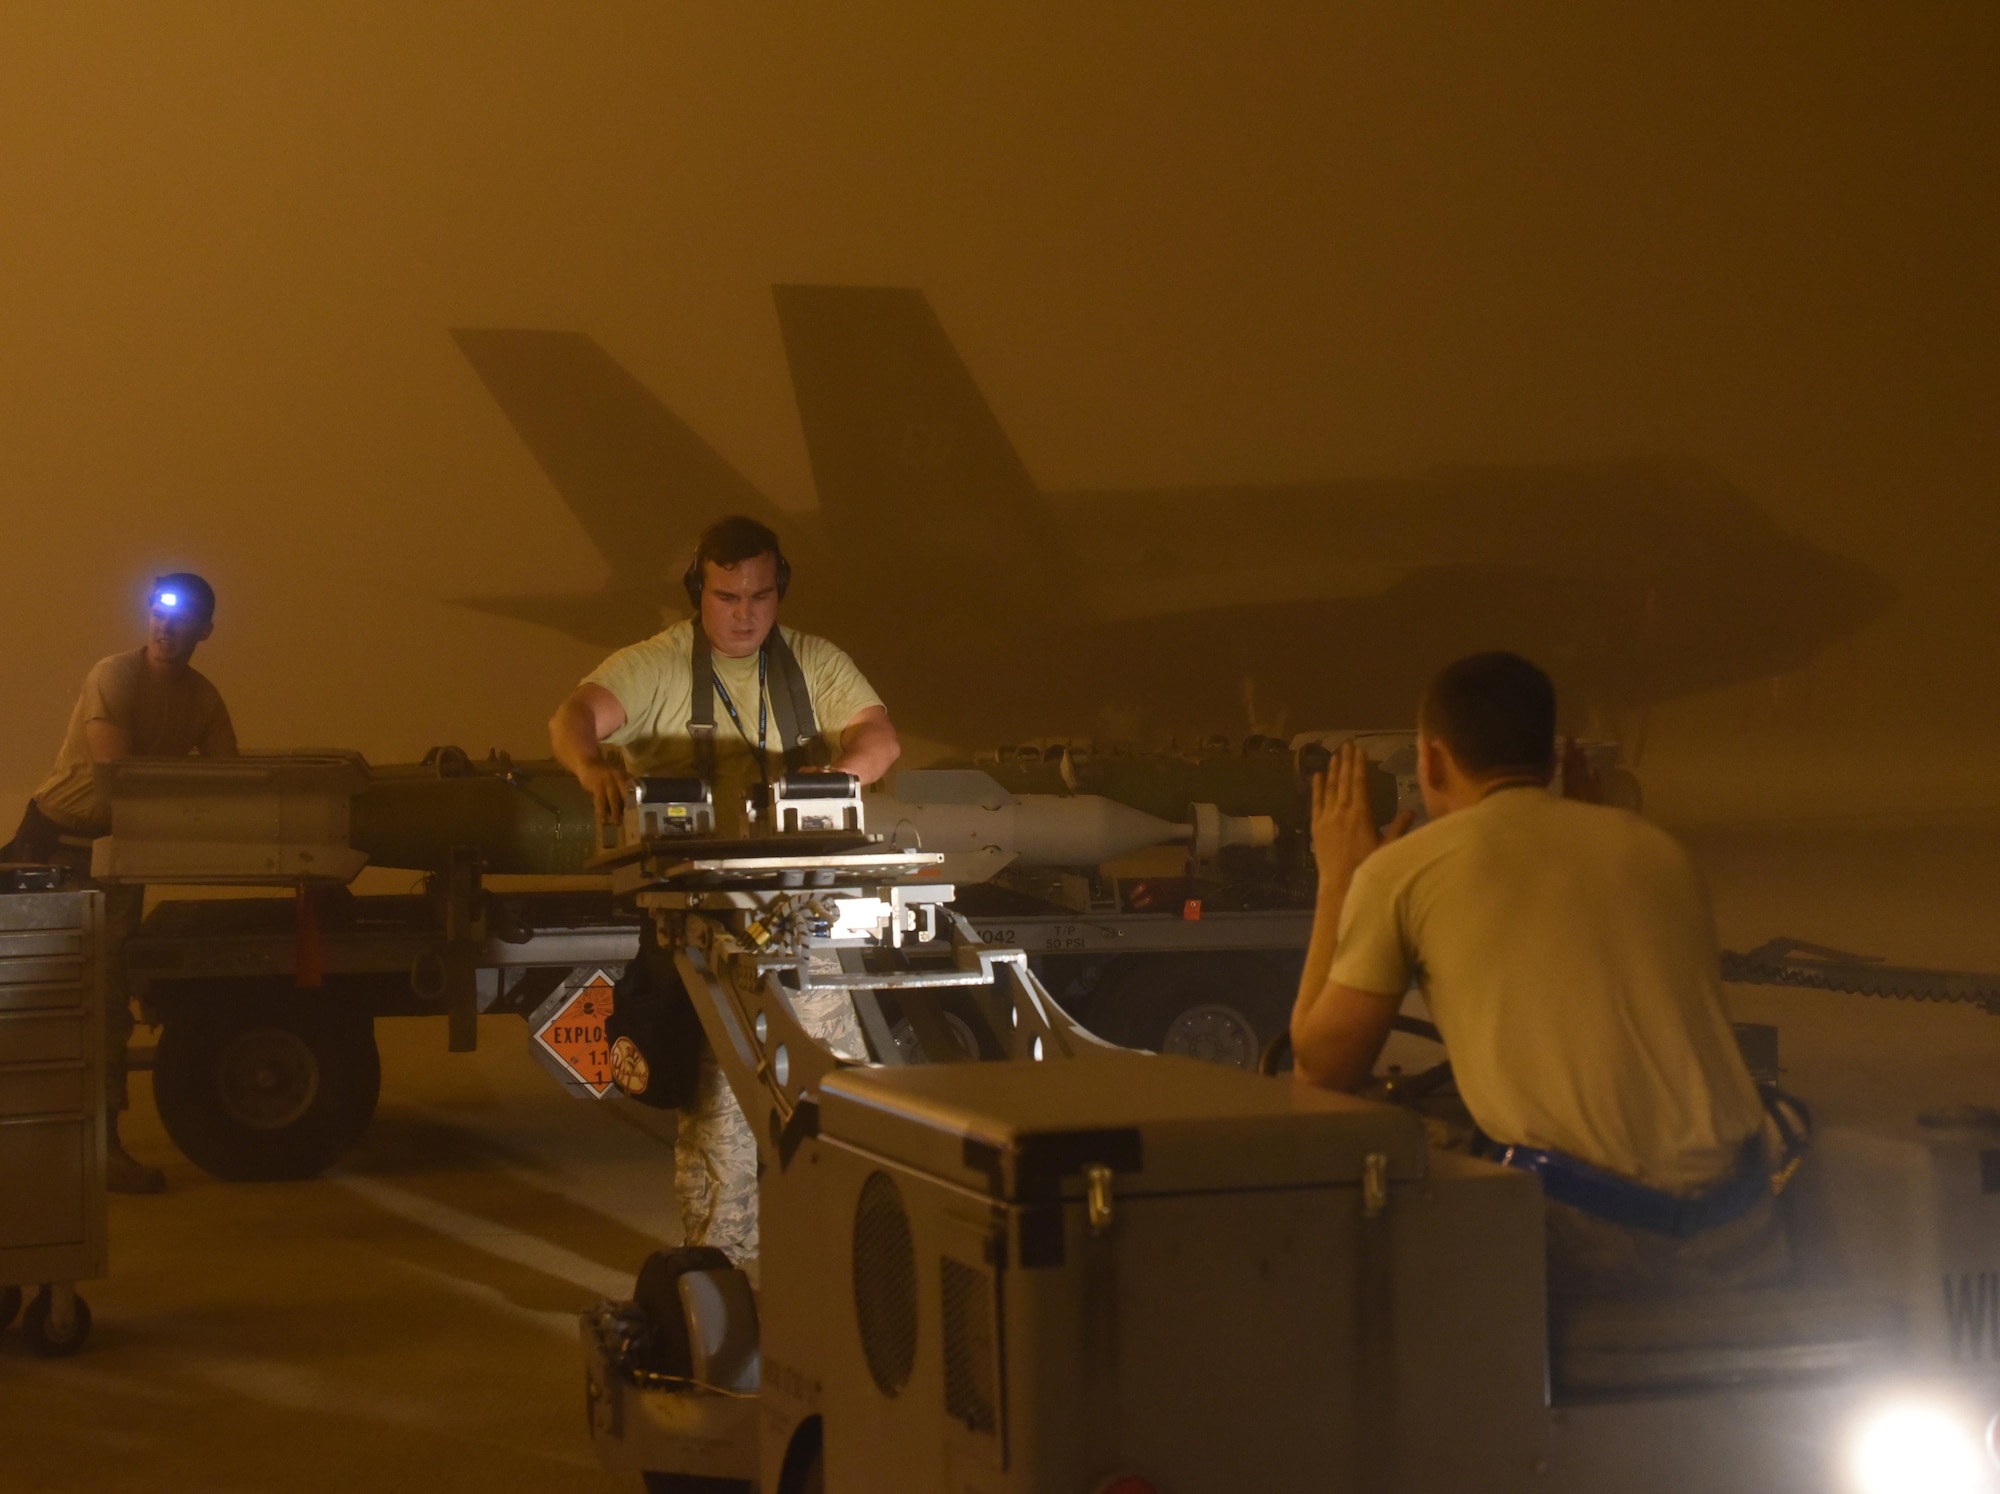 A U.S. Air Force weapons load crew assigned to the 33rd Aircraft Maintenance Squadron transports a live GBU-12 to an F-35A January 18, 2017, at Eglin Air Force Base, Florida. The 33rd Fighter Wing loaded and released the Air Education and Training Command’s first live bombs from an F-35A. Six aircraft were loaded with armed GBU-12s, and two bombs were released over the Eglin Air Force Base range. (U.S. Air Force photo by Staff Sgt. Peter Thompson)